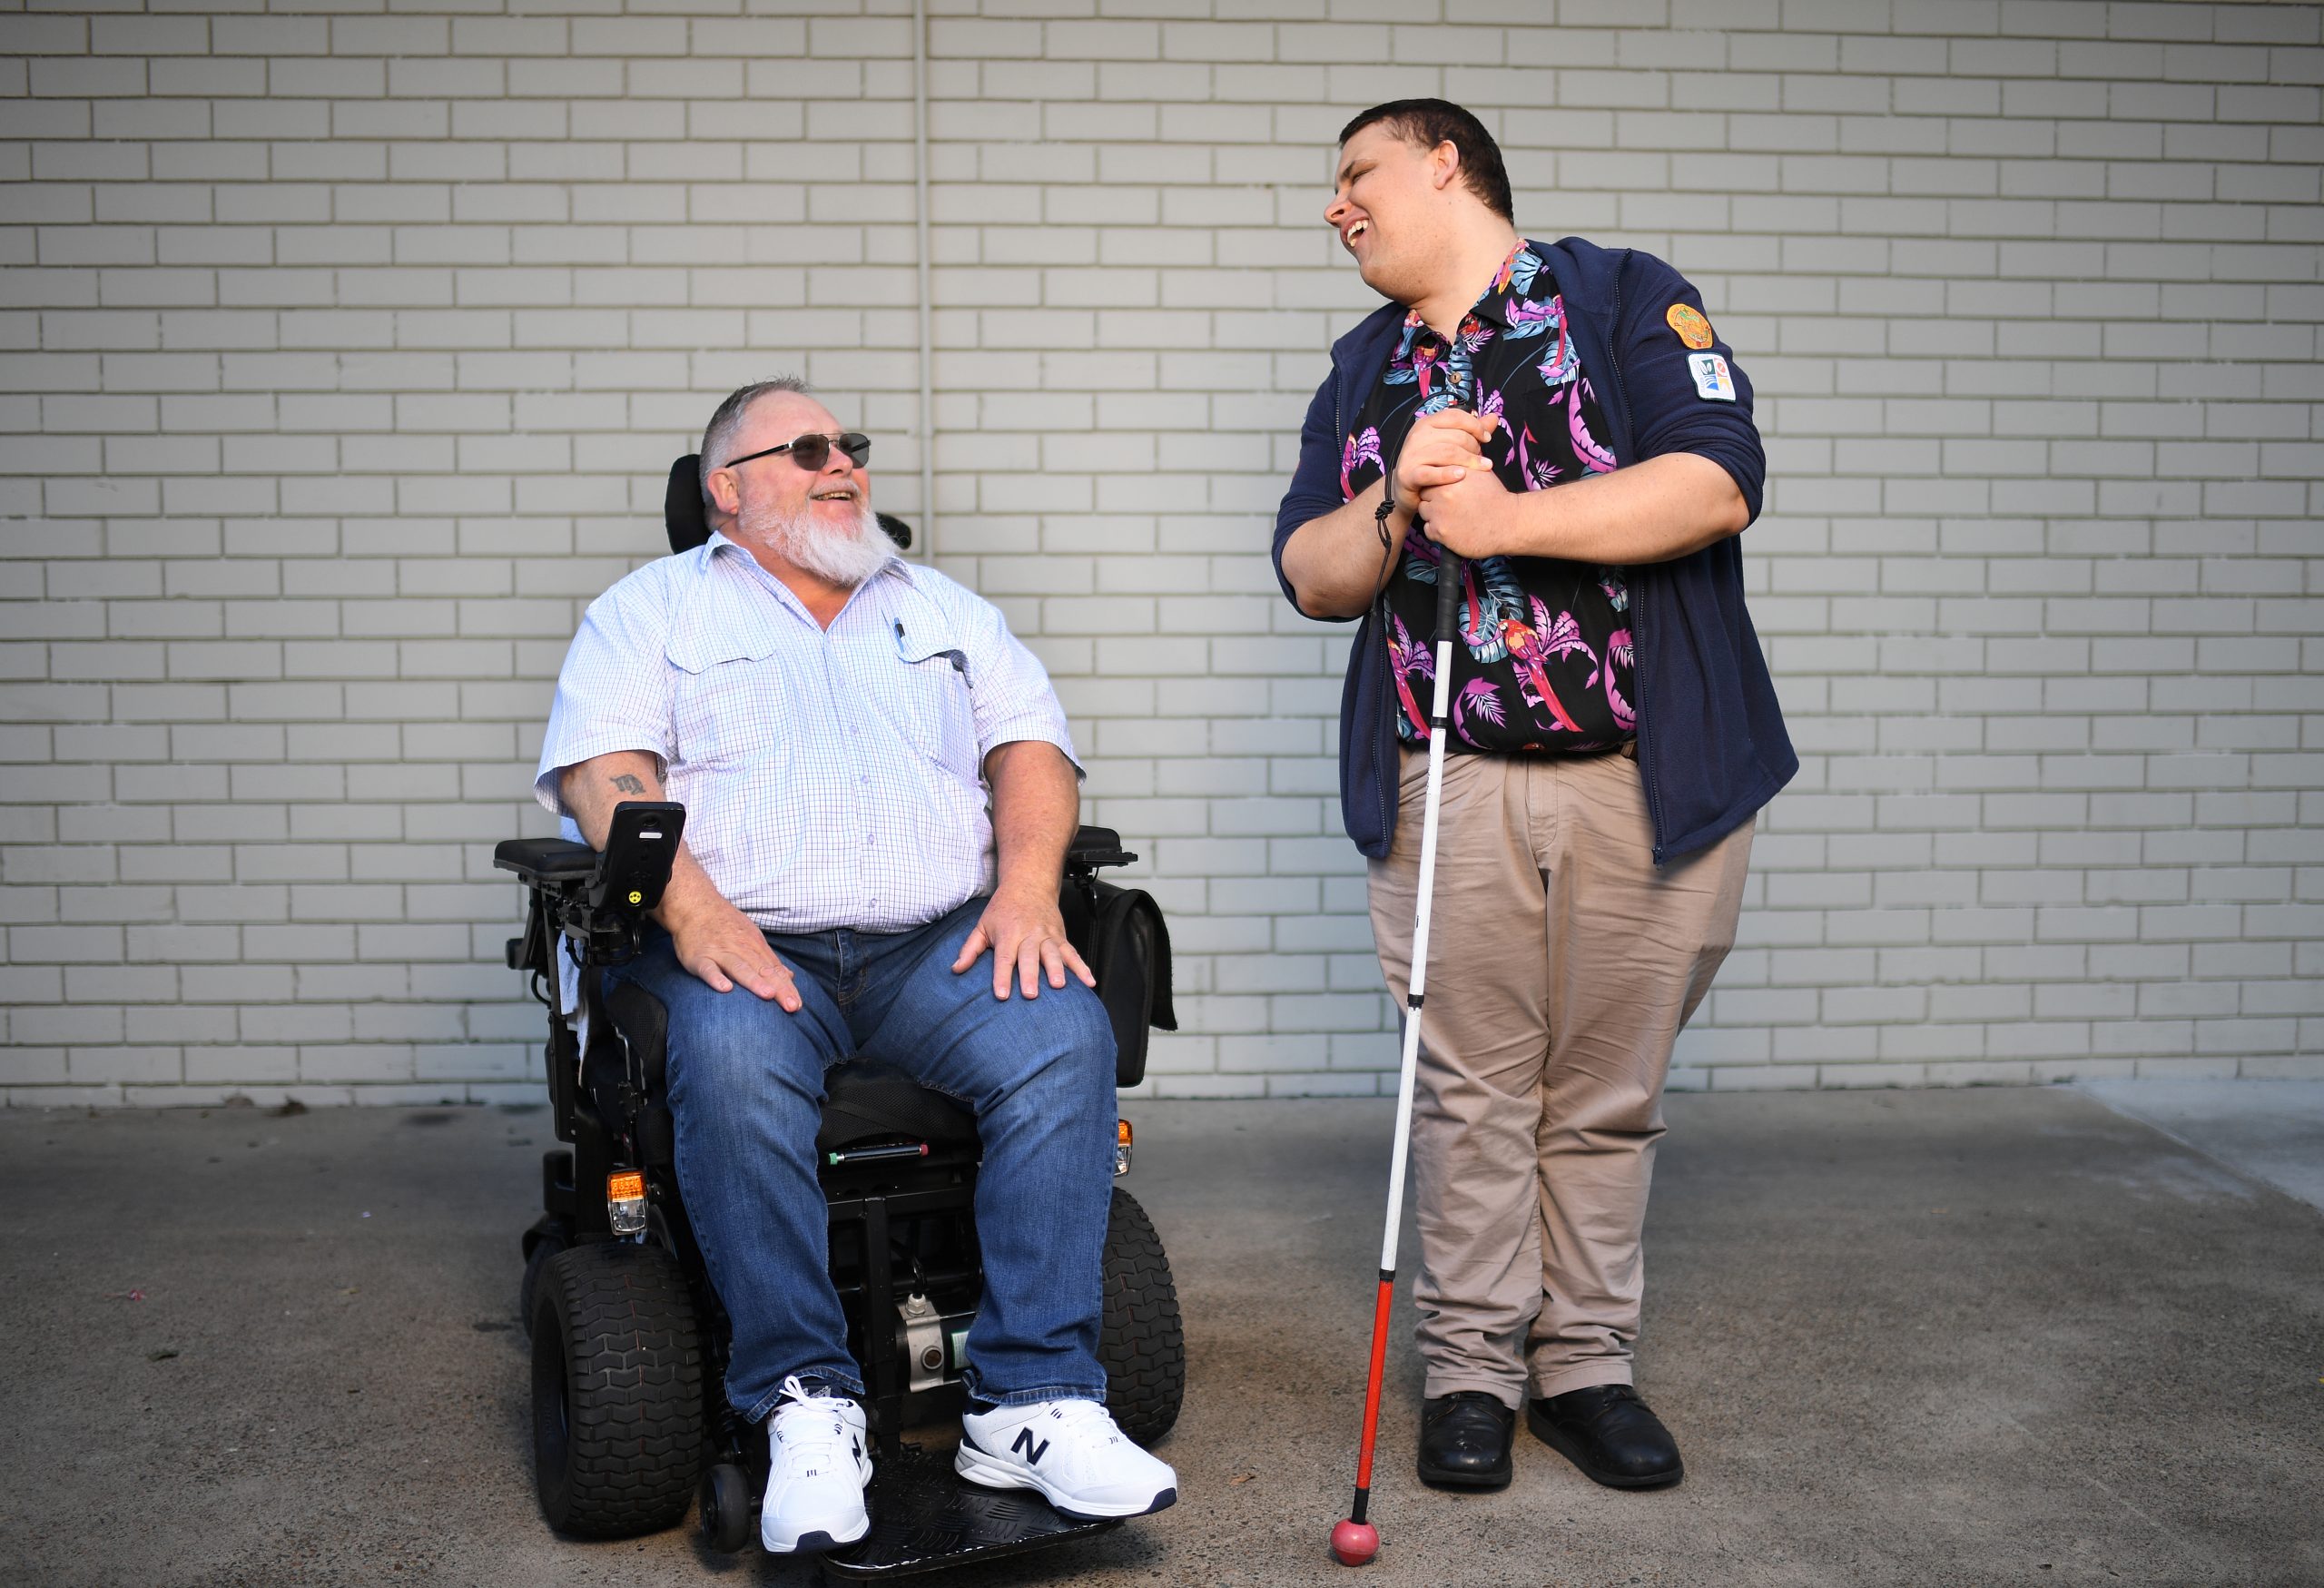 A man in a wheelchair is looking up and smiling at a man standing beside him, who is smiling and looking down. They are in front of a white brick wall.